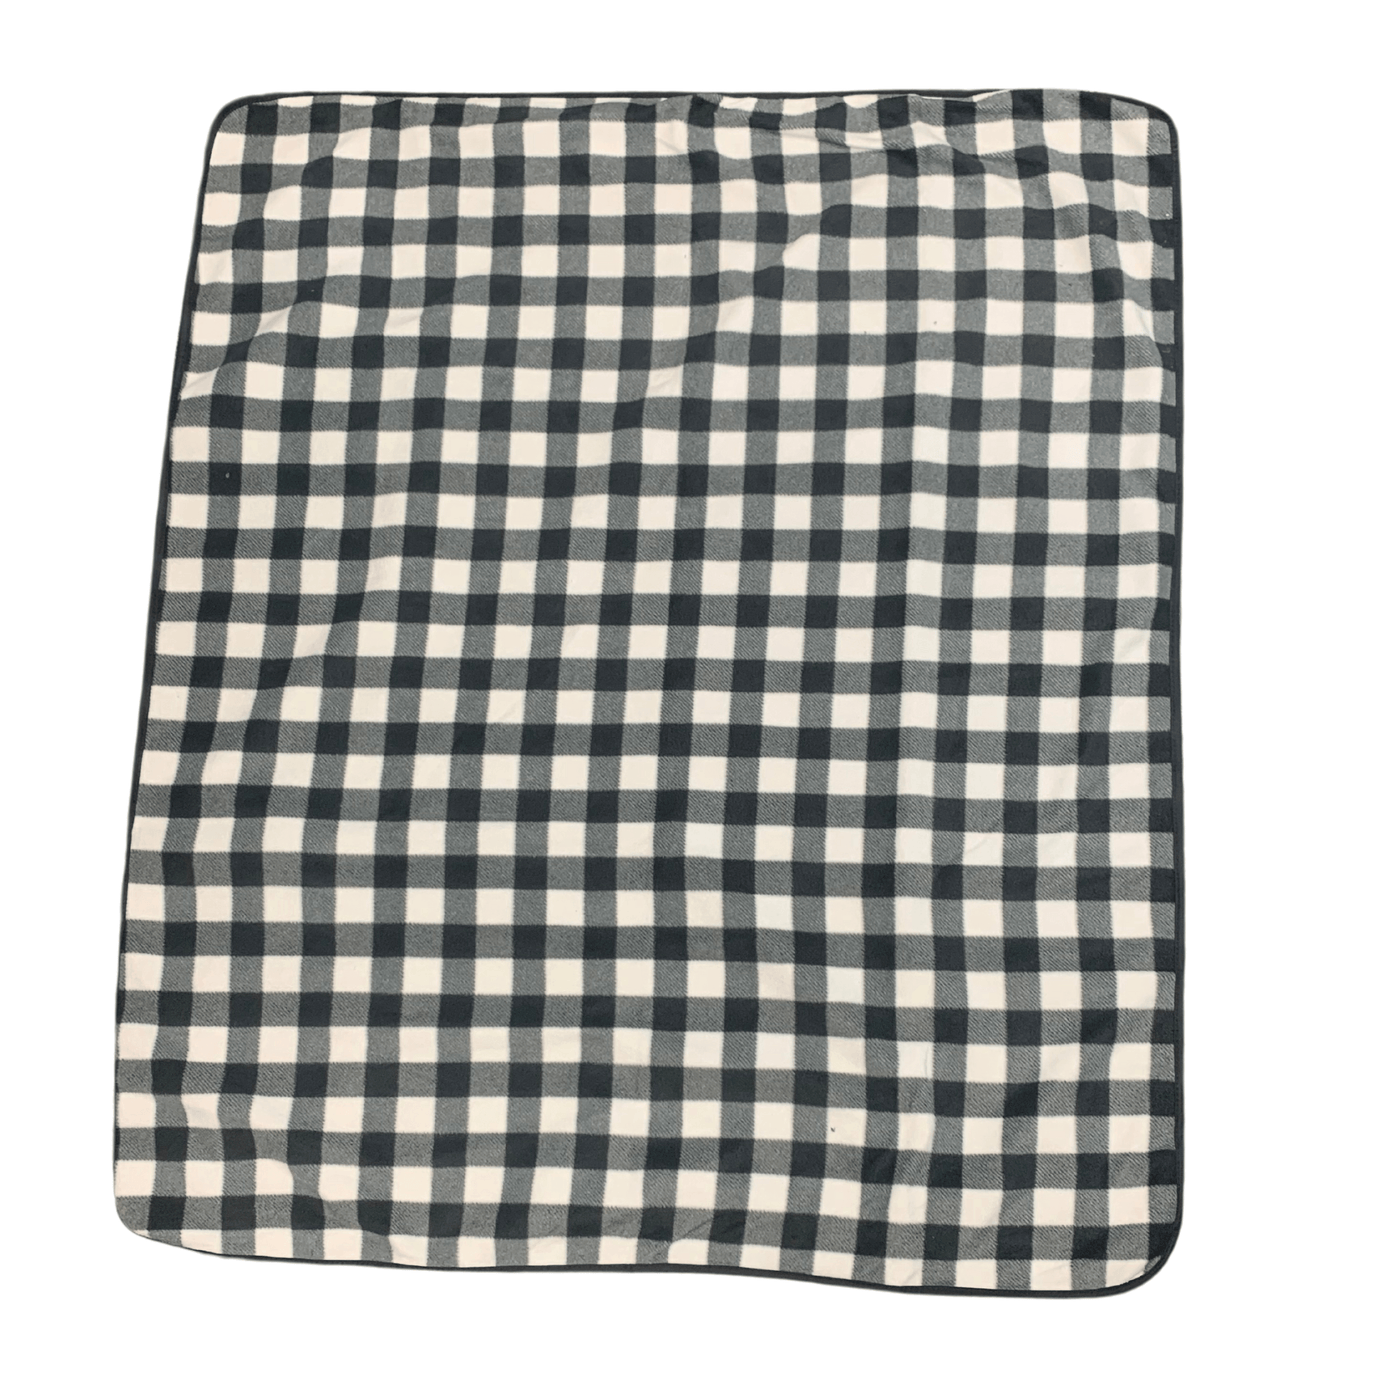 Picnic Blanket -White/Black - Carry The Load Shop